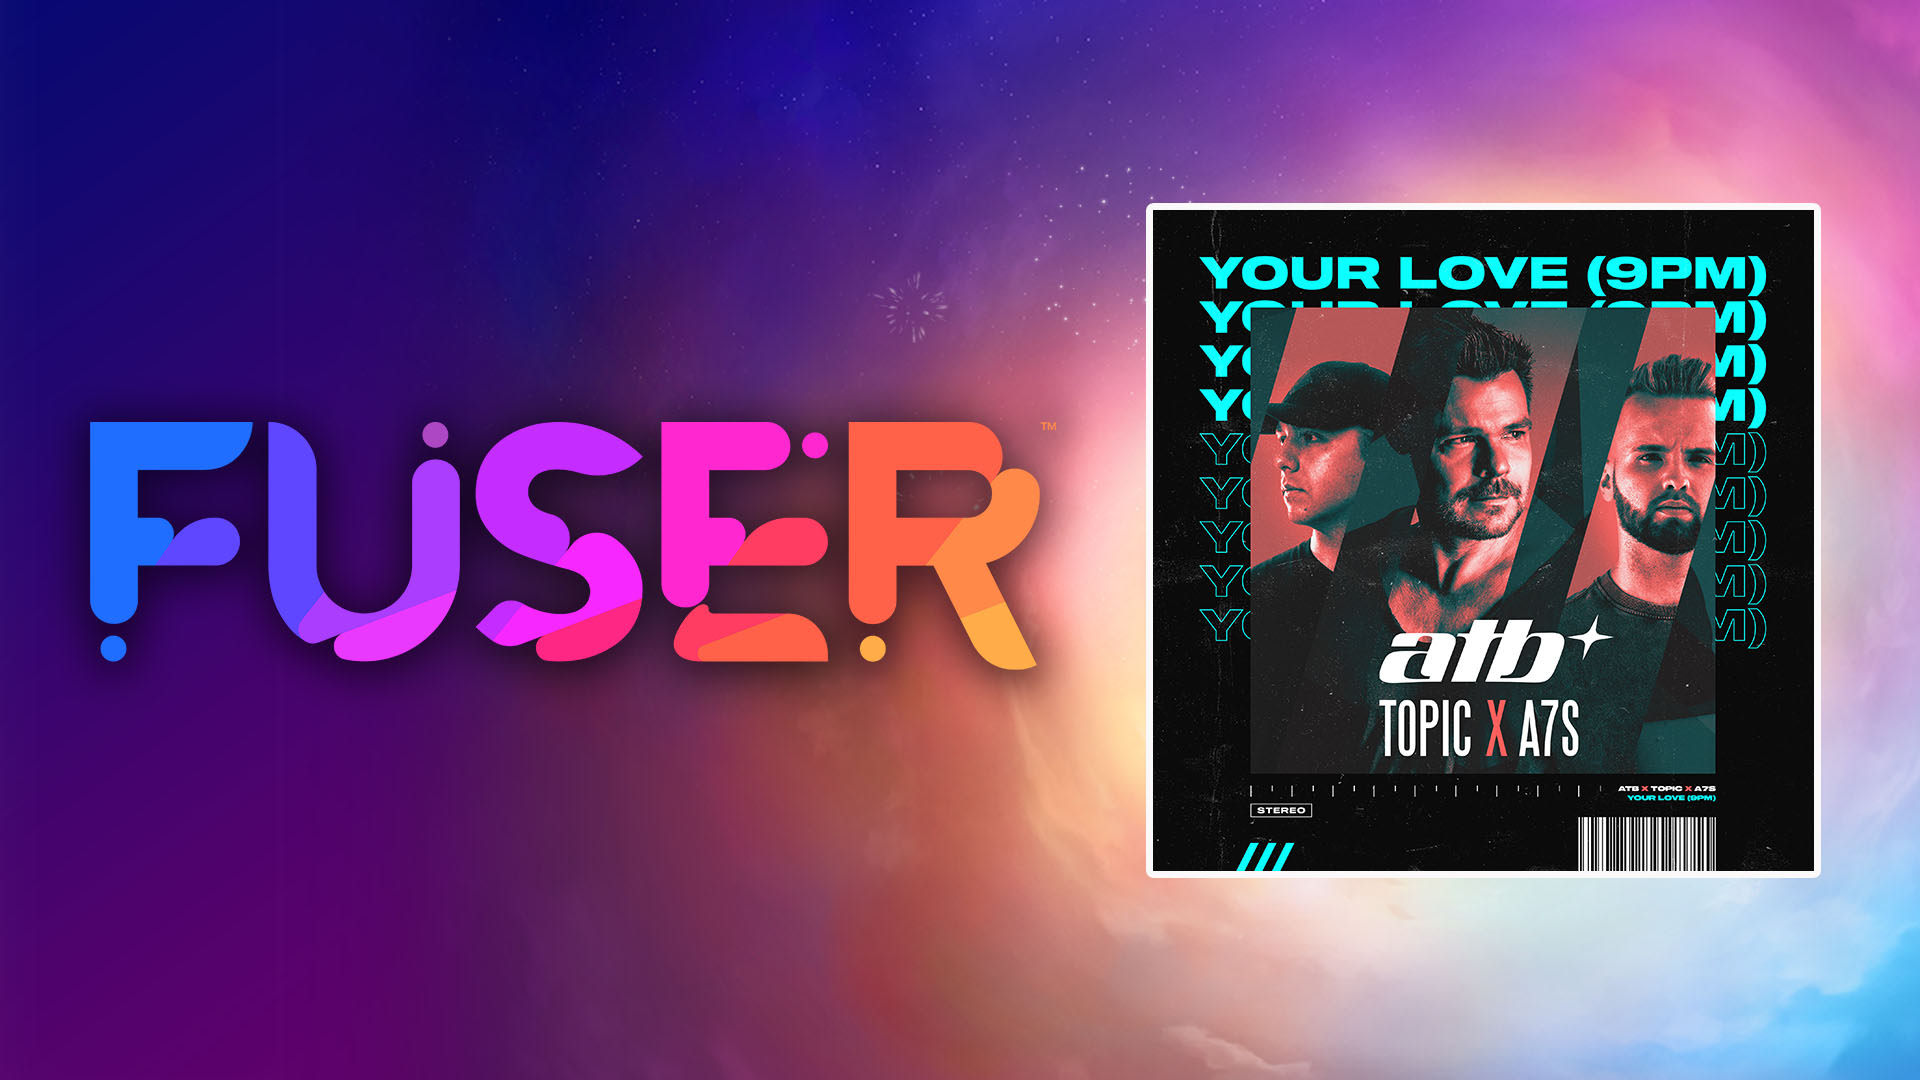 ATB, Topic, A7S - "Your Love (9PM)"